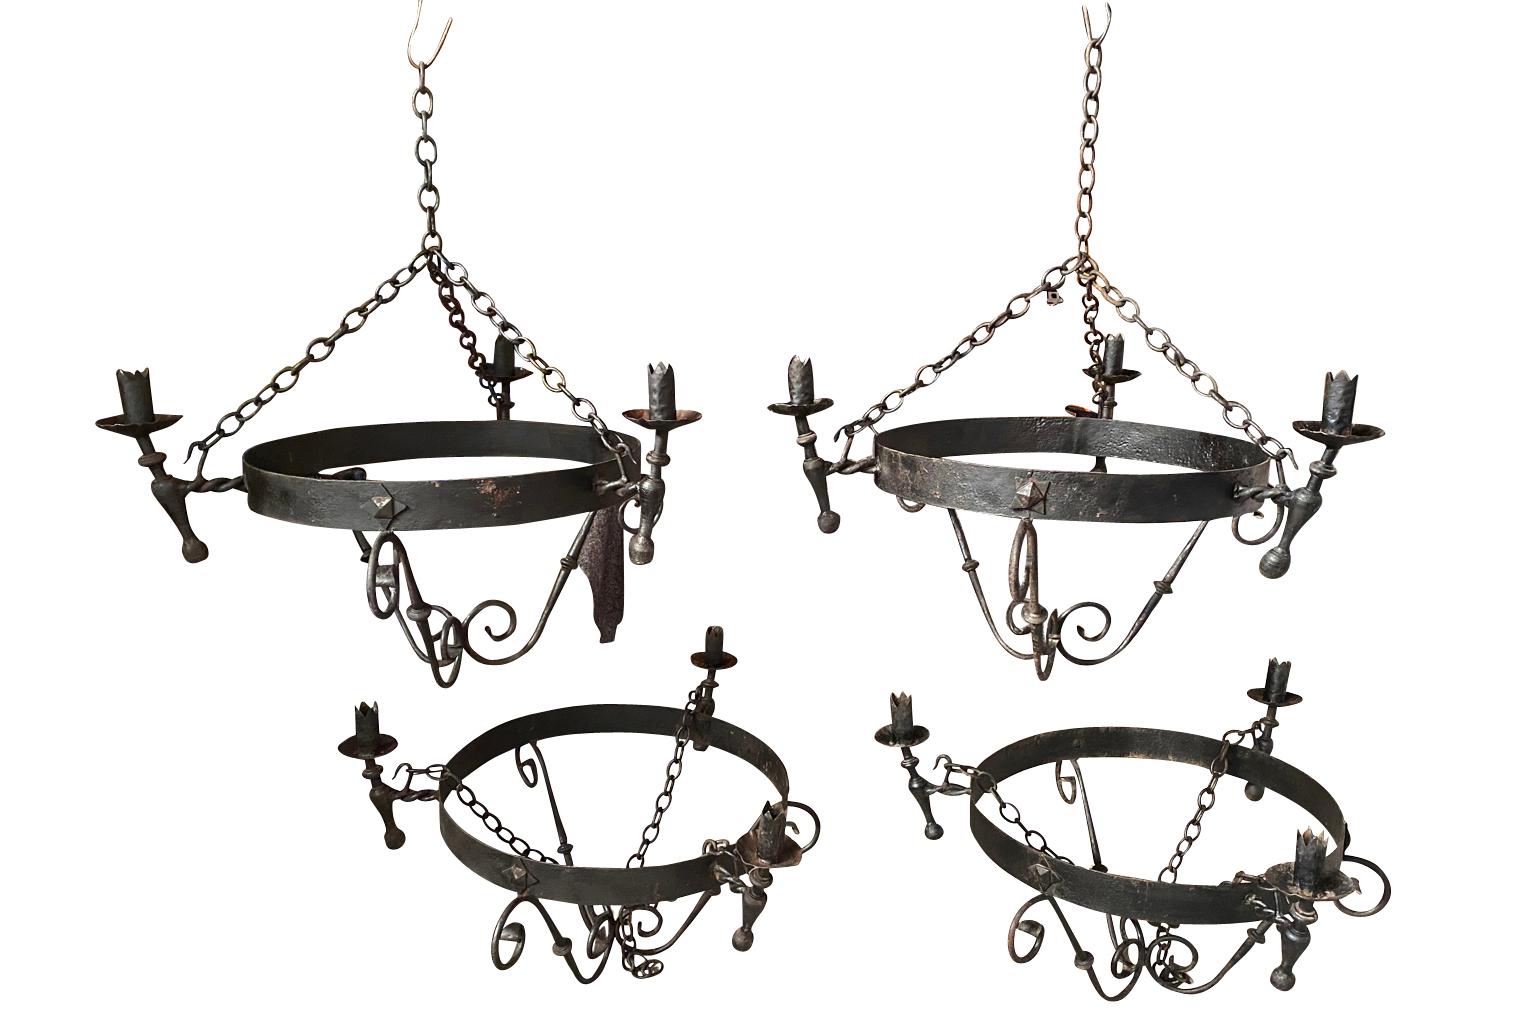 A very handsome set of four chandeliers from Spain. Beautifully constructed from hand forged iron. Stunning statement pieces.